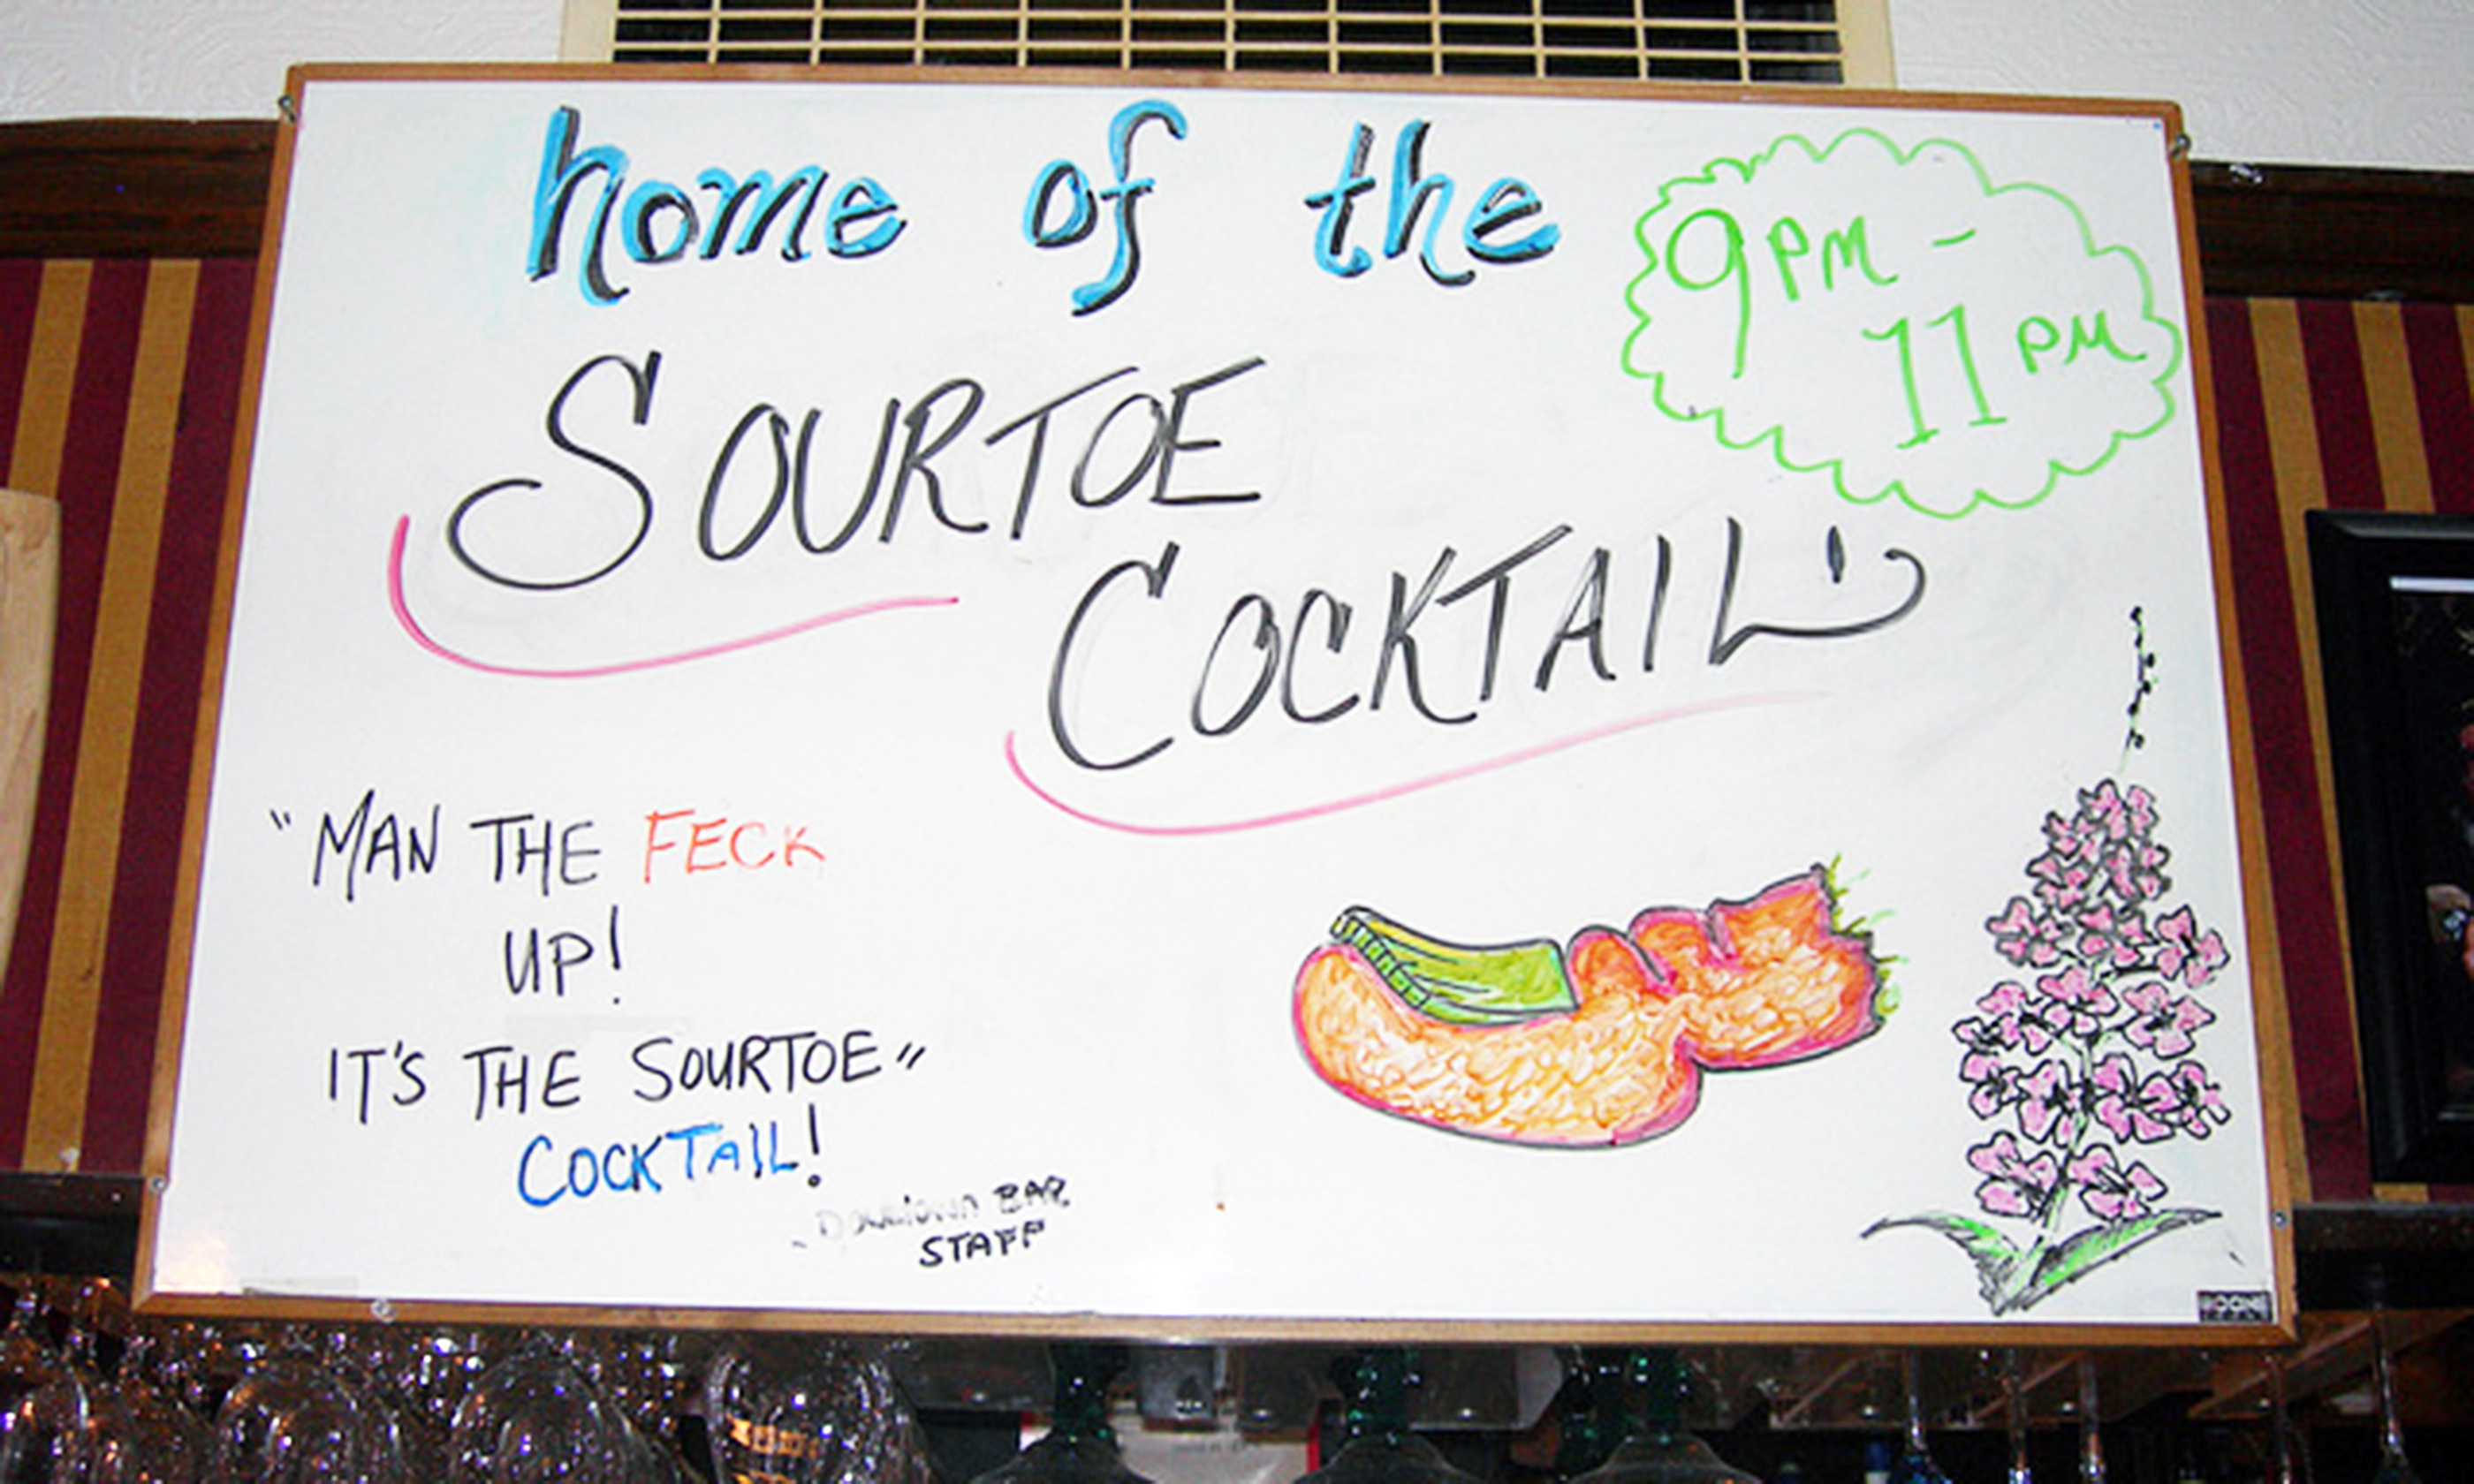 Sour Toe Cocktail Sign (Jimmy Emerson/Flickr)